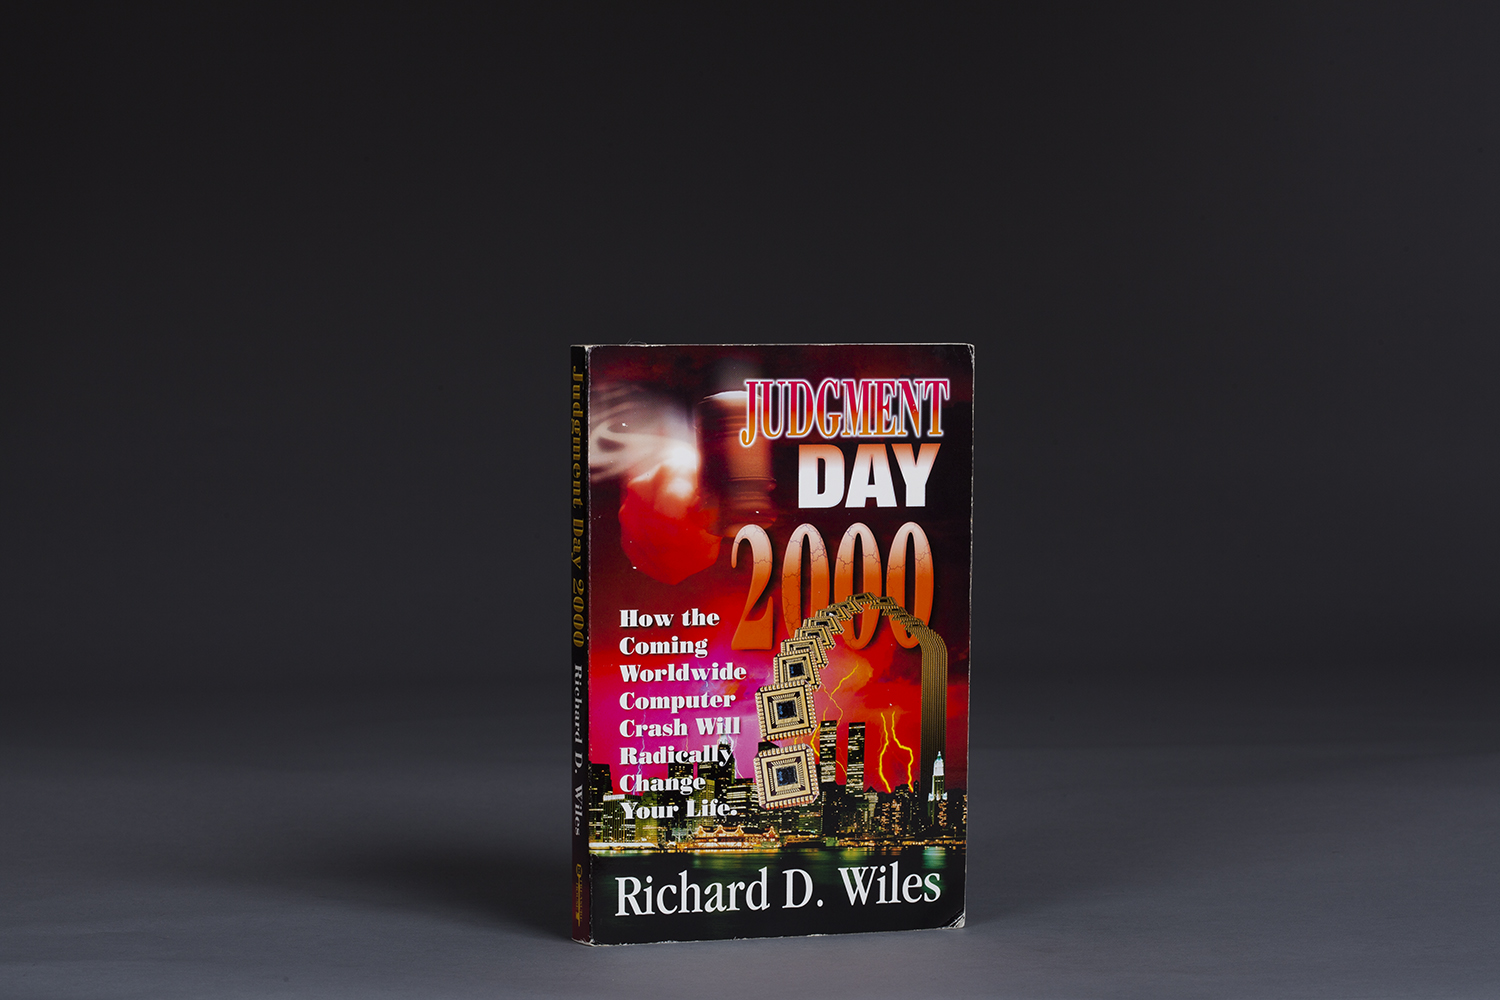 Judgment Day 2000 - How the Coming - 0271 Cover.jpg